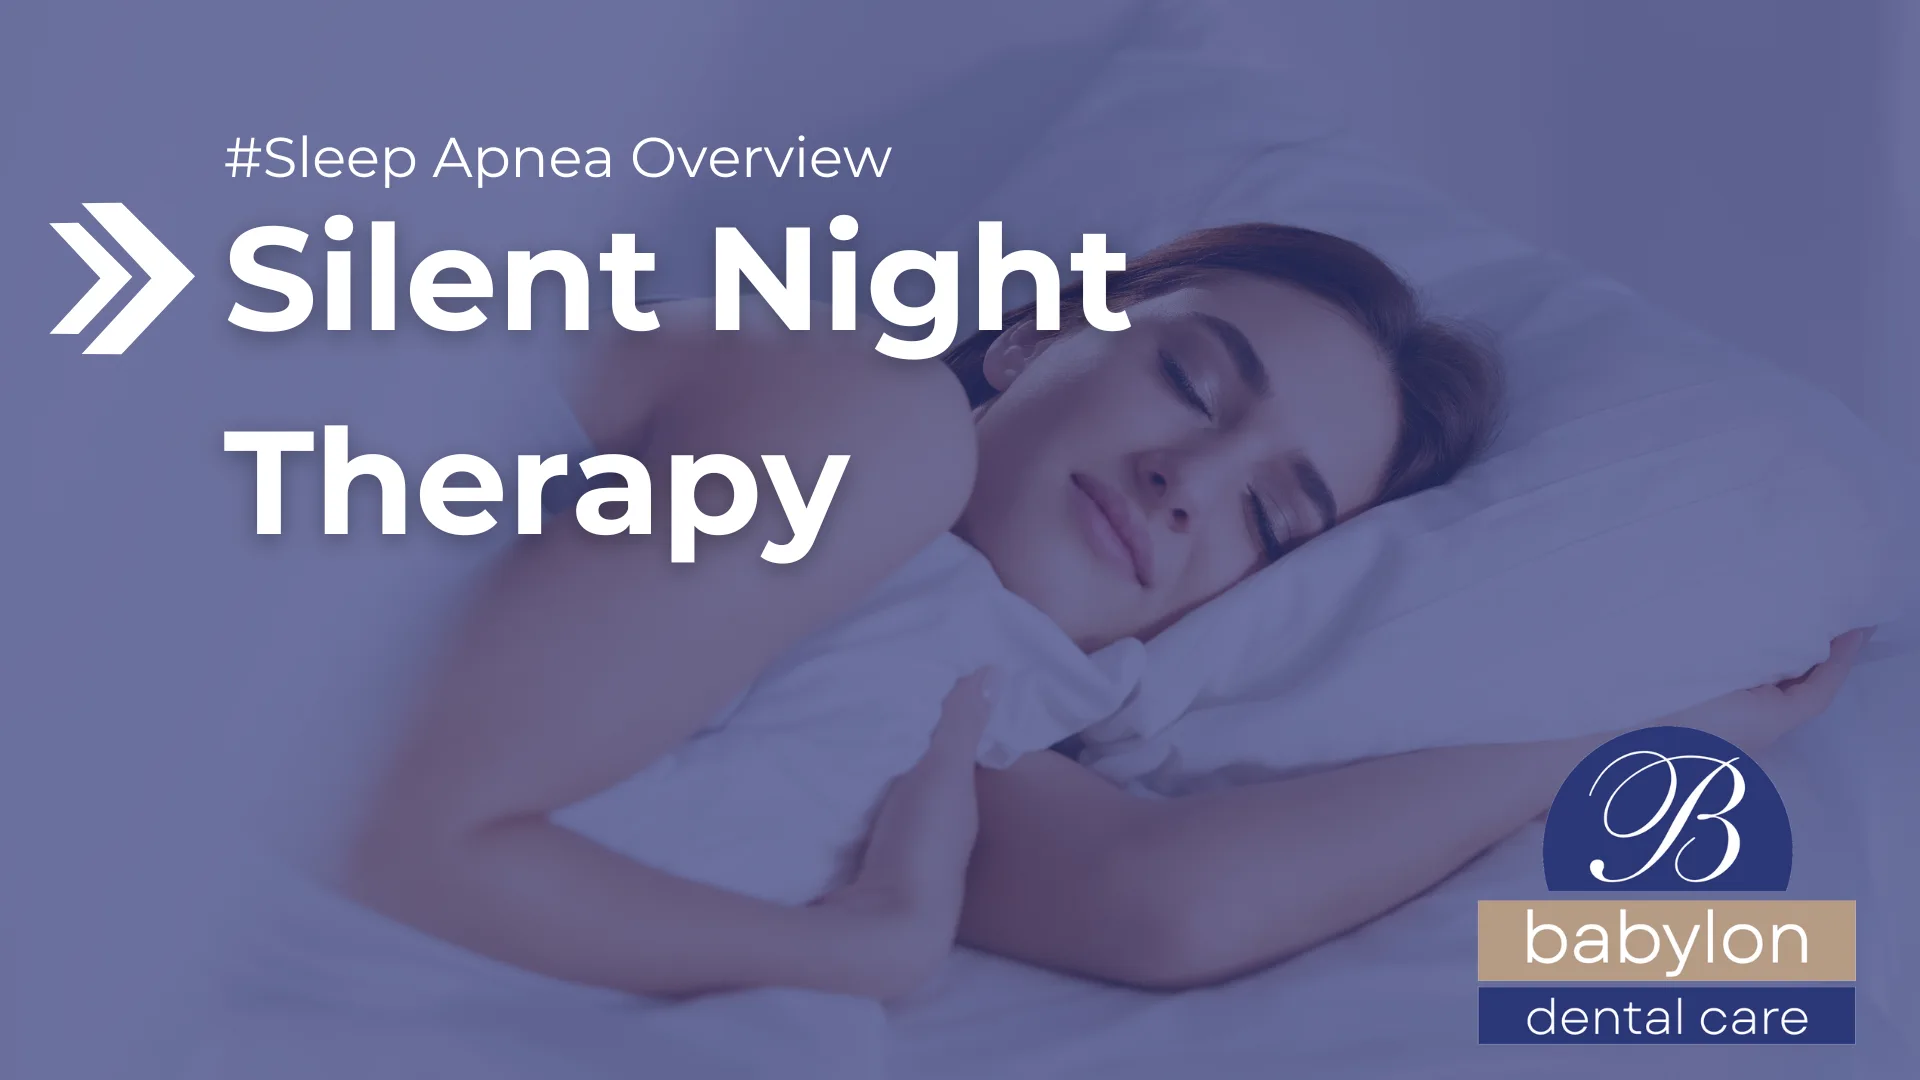 Silent Night Therapy Image - new logo